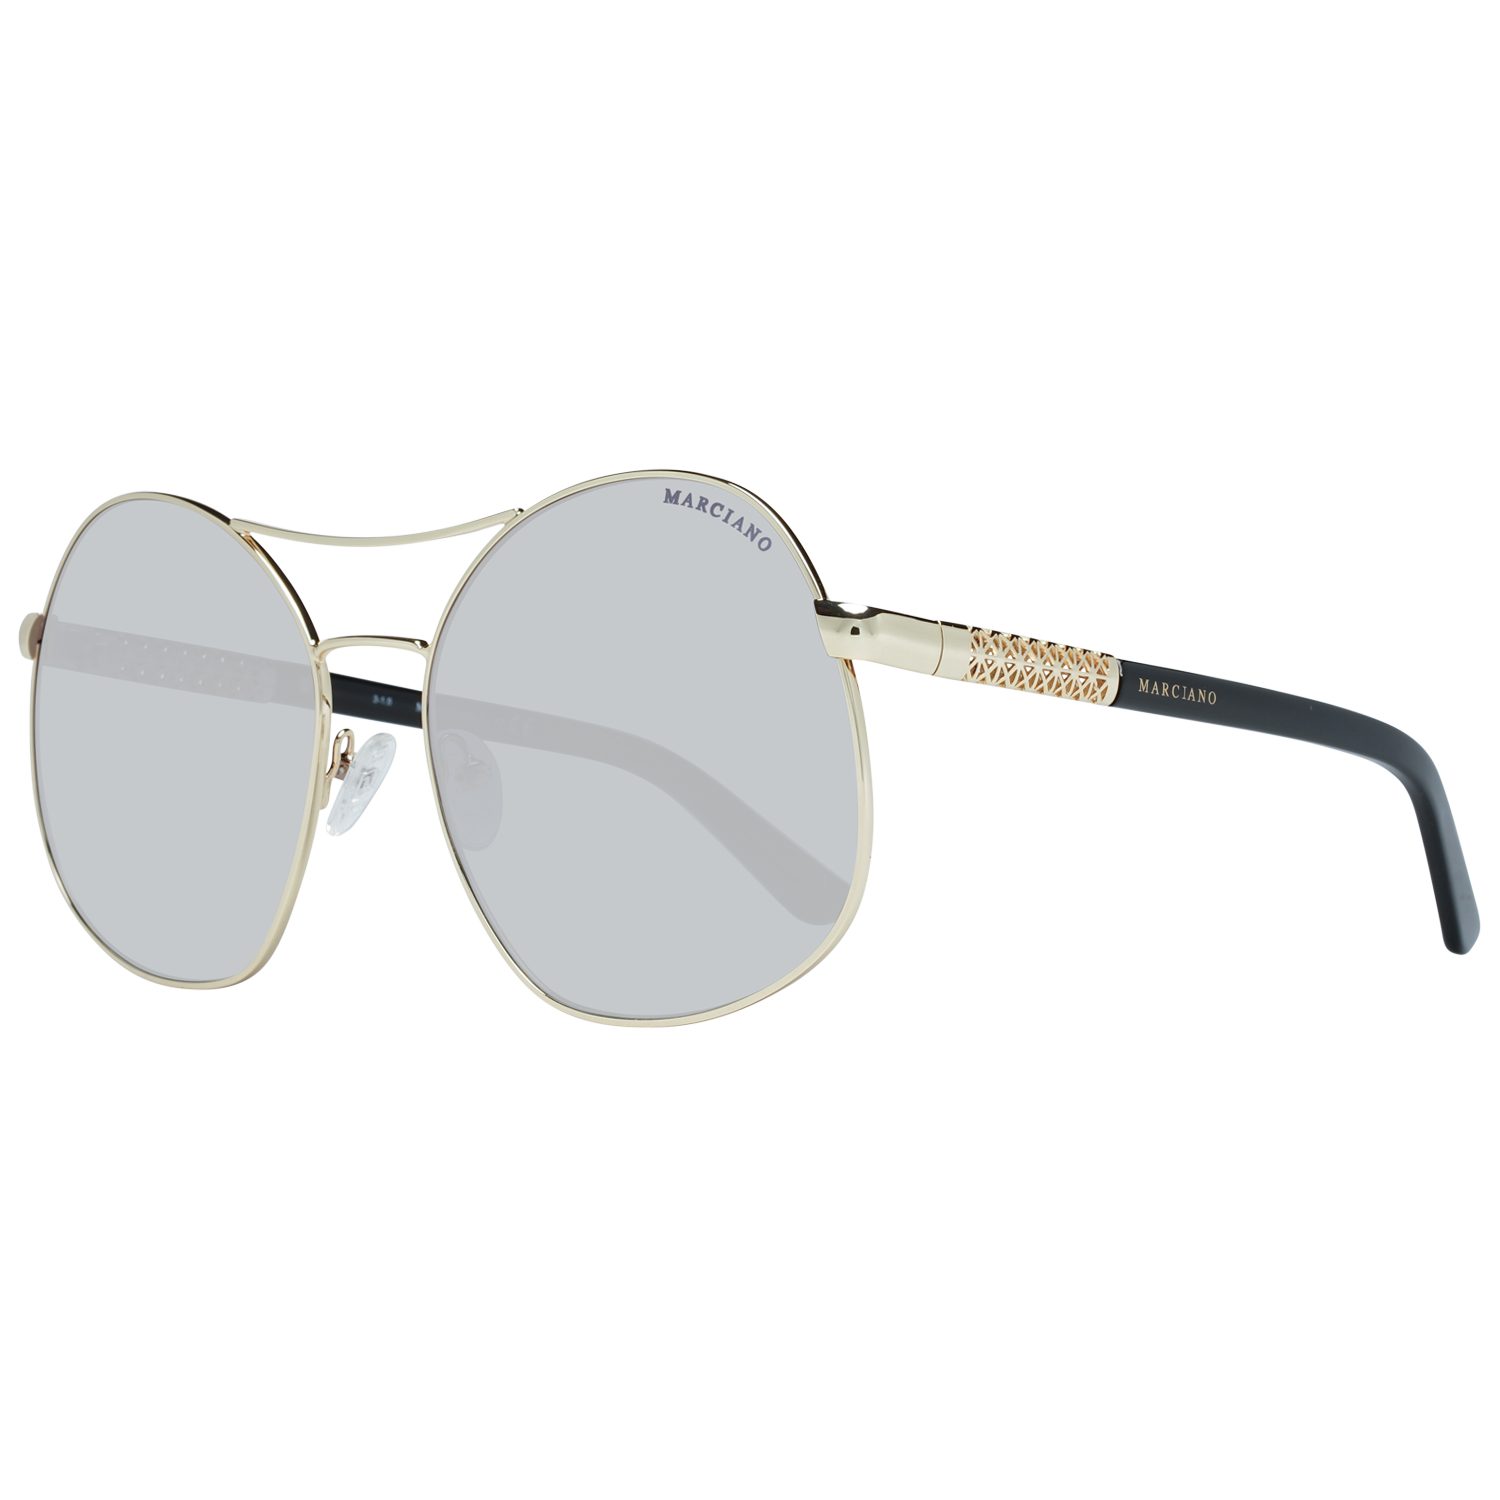 Guess by Marciano Sonnenbrille GM0807 6232C